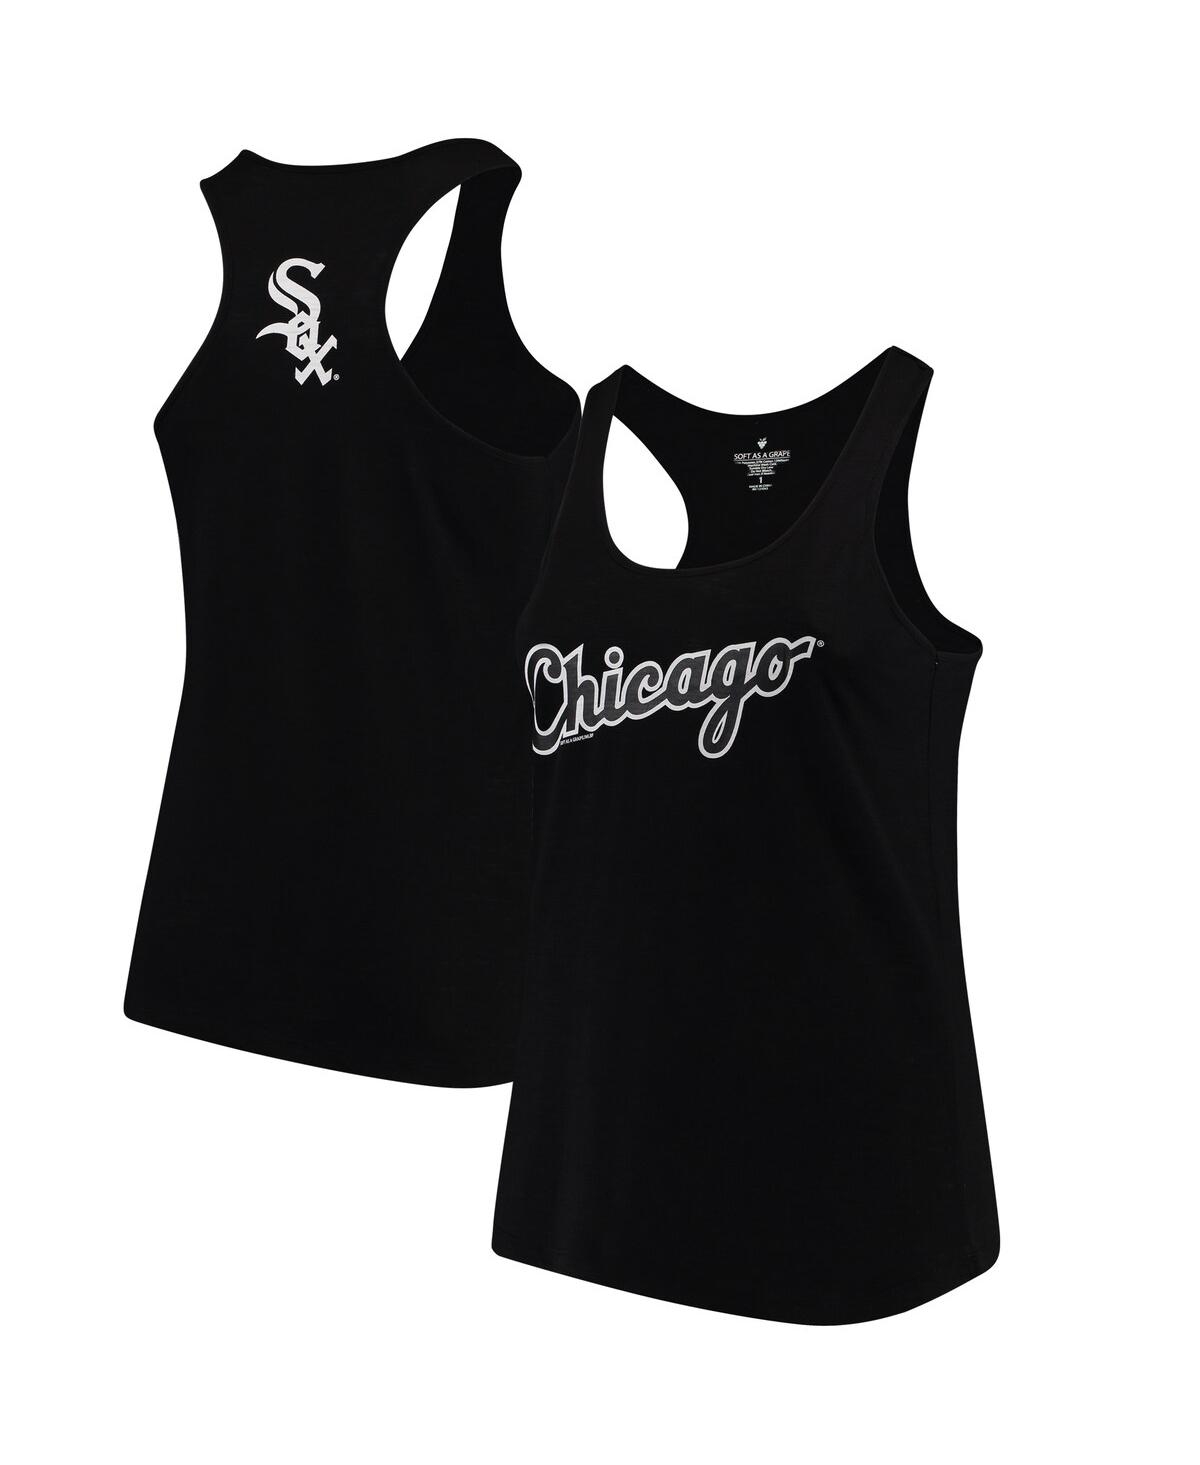 Chicago White Sox Soft As A Grape Women's Plus Size Swing for The Fences Racerback Tank Top - Black